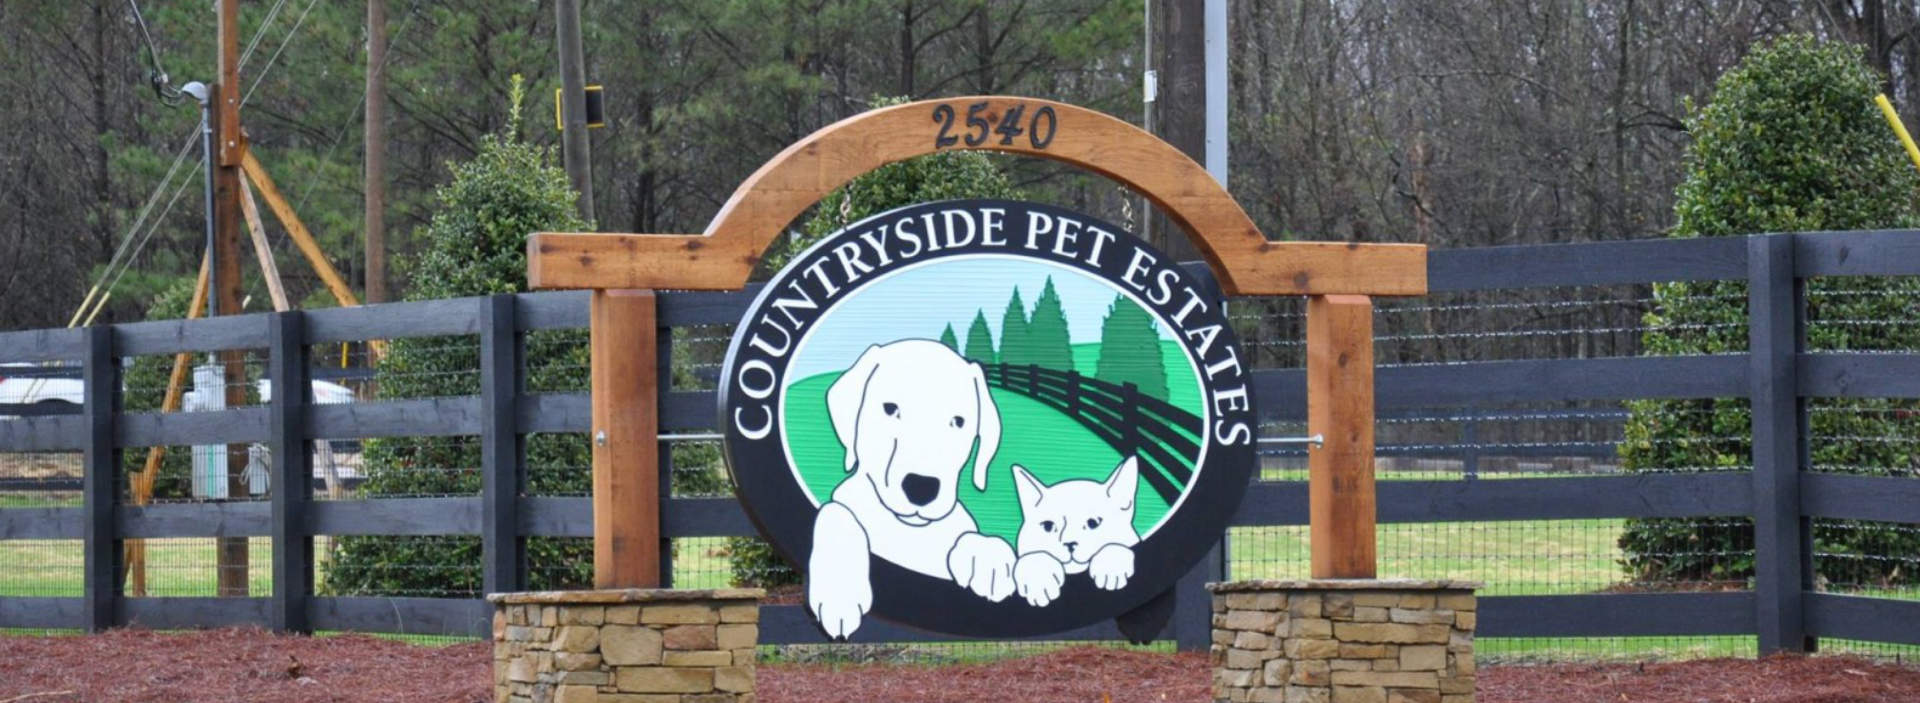 Countryside Pet Estates banner installed on a fence